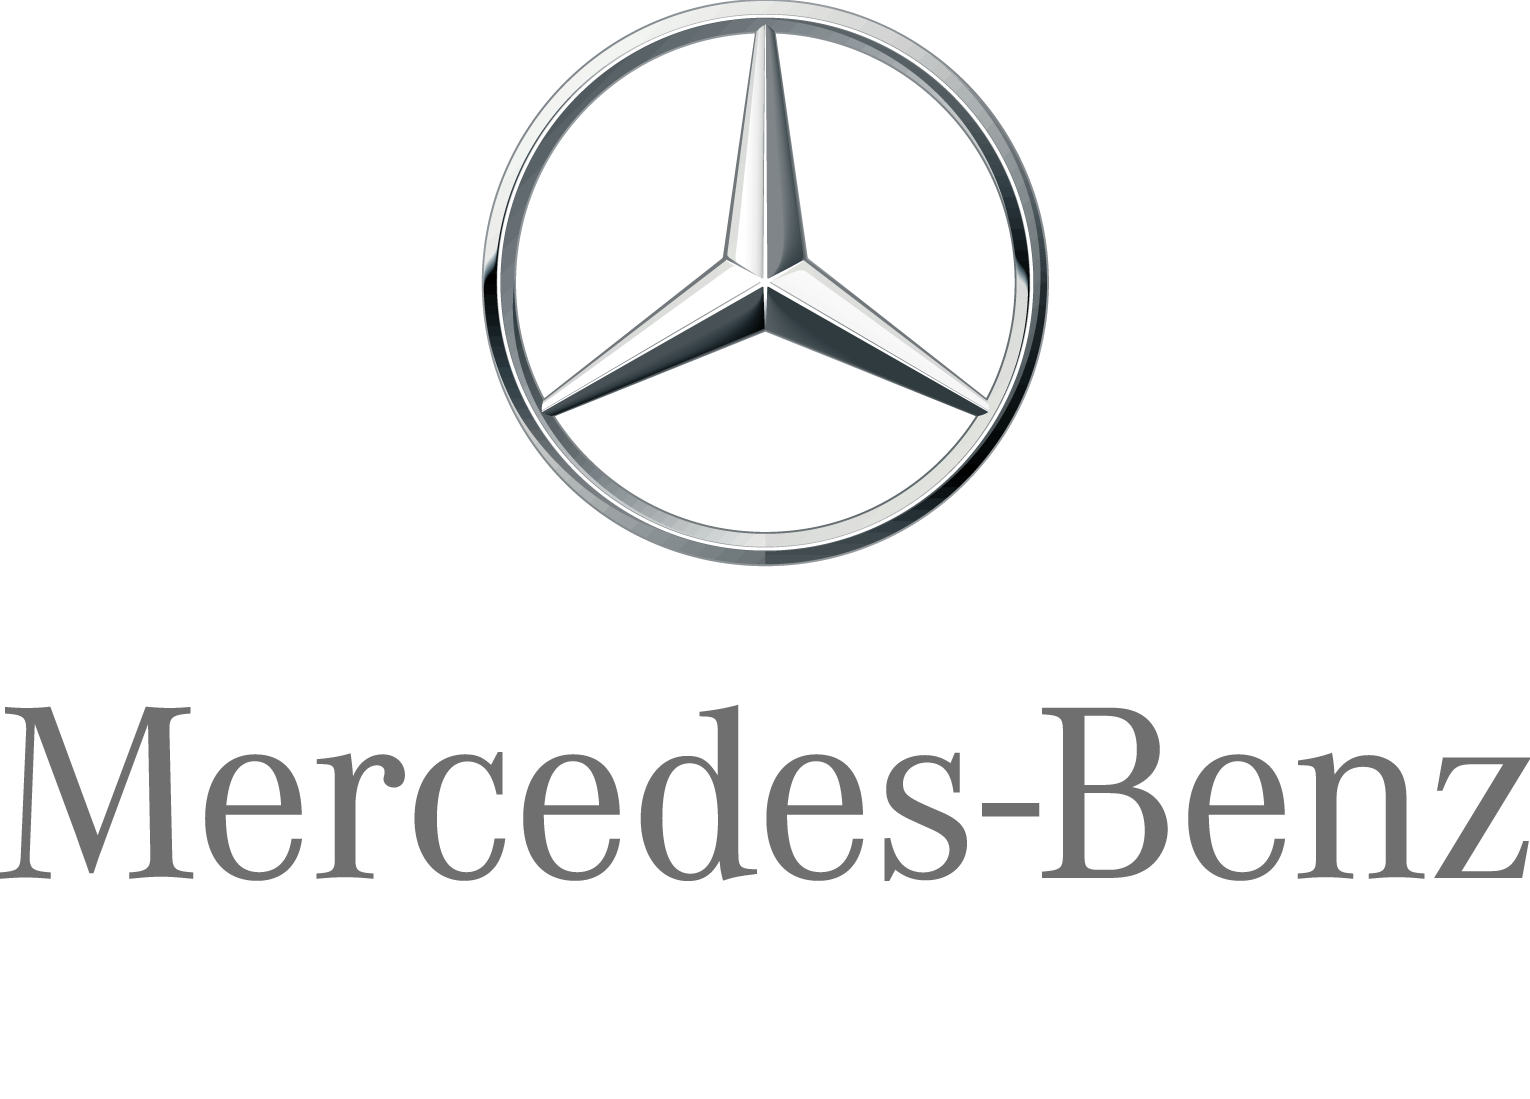 mercedes-benz-logo-png-mercedes-benz-logo-png-image-1530.png